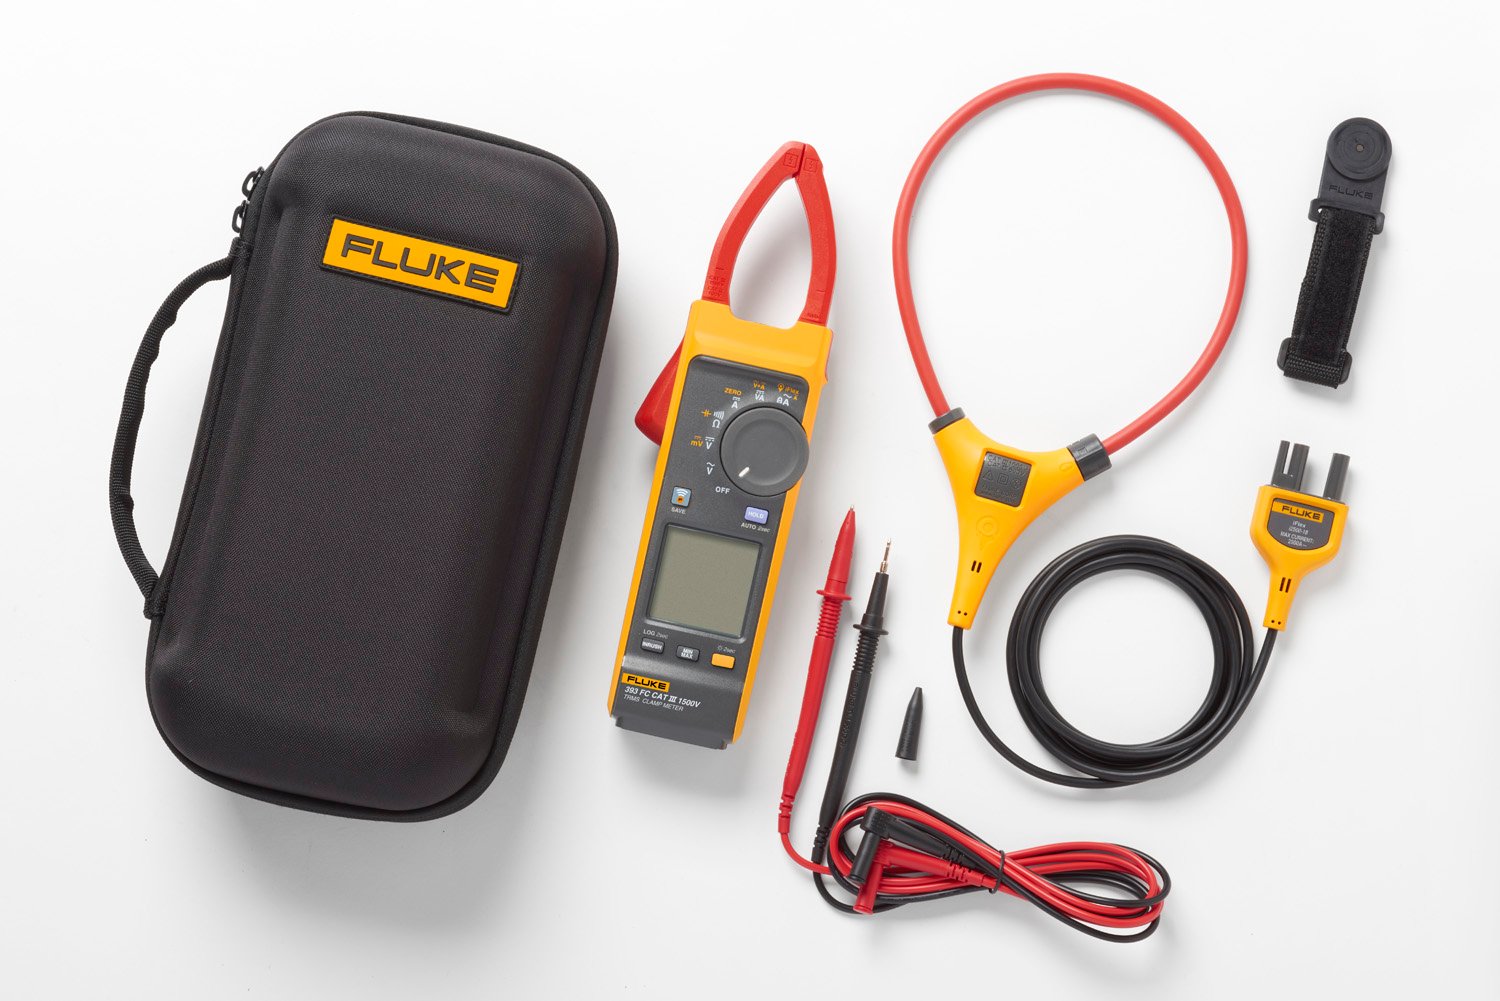 The Fluke 393 FC with test leads, iFlex flexible current probe, magnet holder, and carrying case